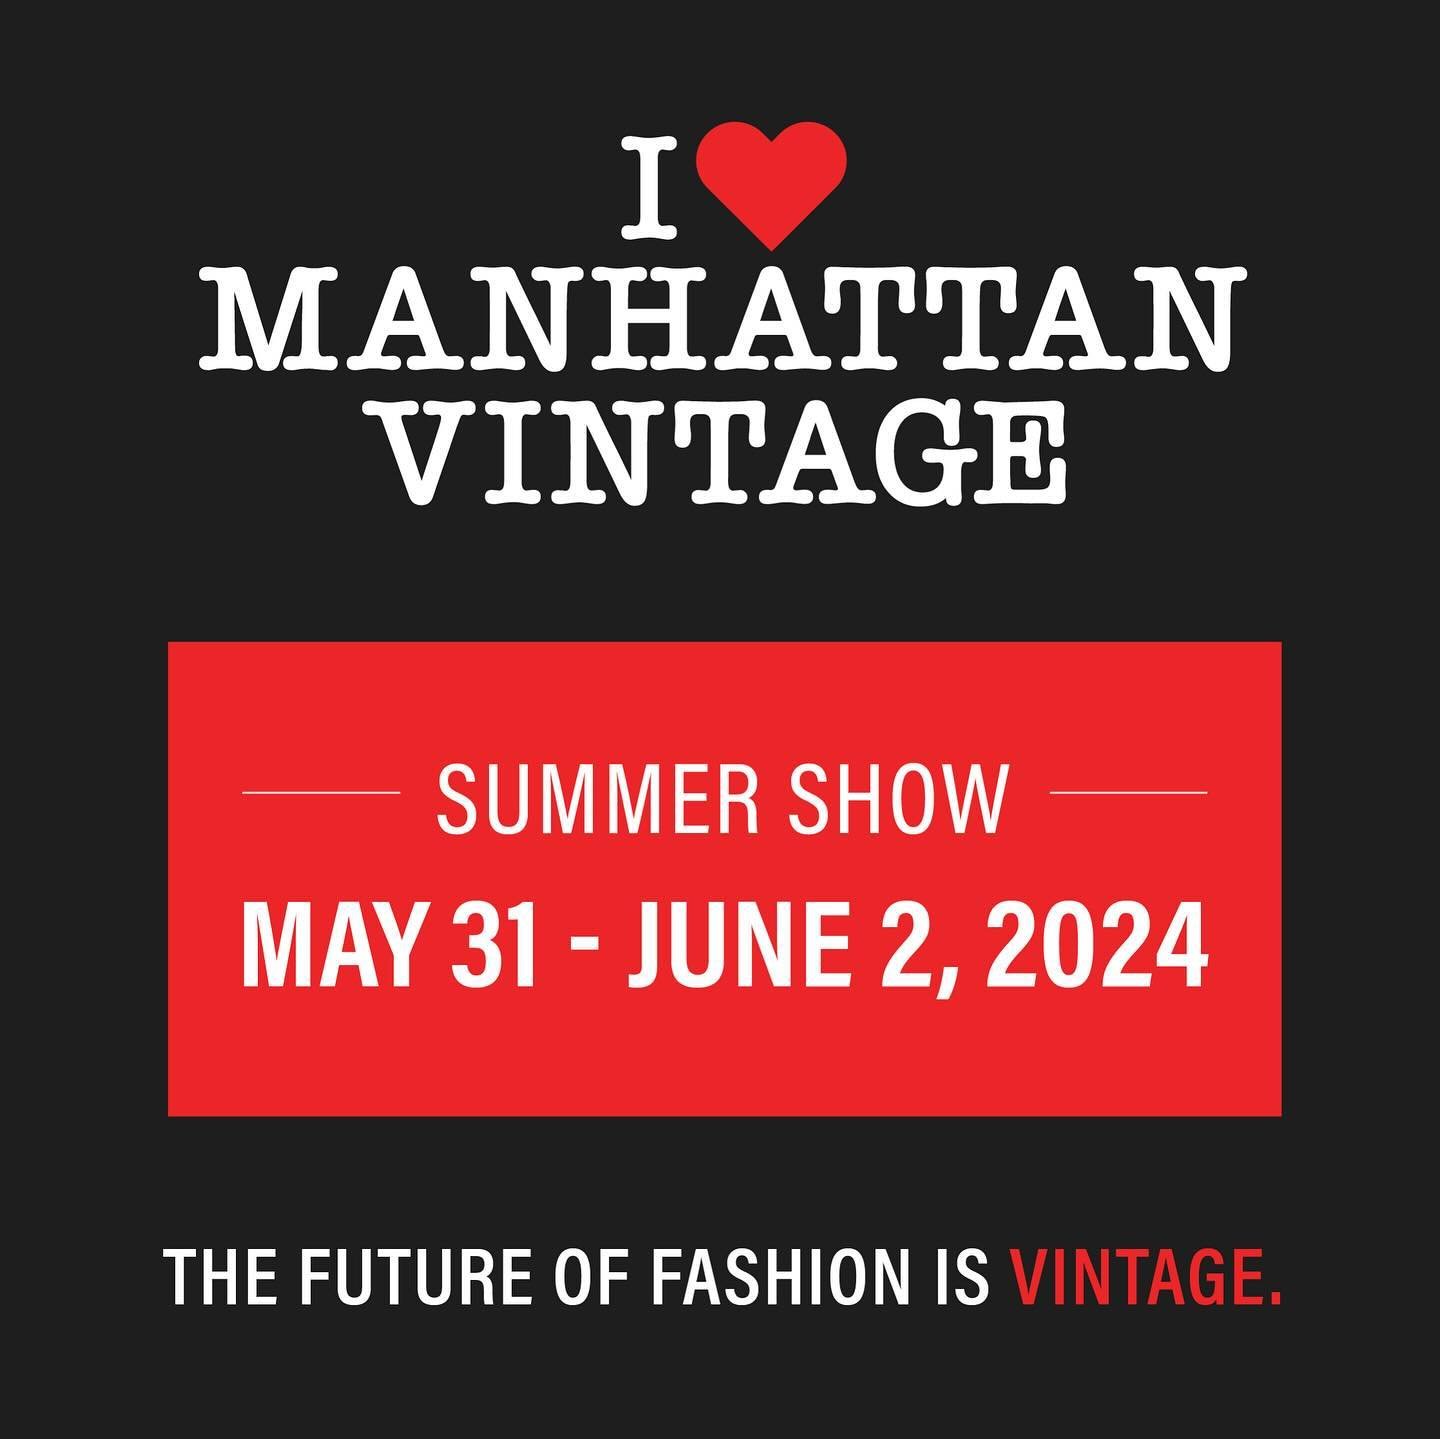 Wow, and just like that, exactly 3 weeks to the first ever SUMMER MANHATTAN VINTAGE SHOW (@thevintageshow)! &hearts;️ I&rsquo;m so excited to be back alongside my creative collaborators and friends @denny623 &amp; Briana of @d.b.archive to bring ya&r